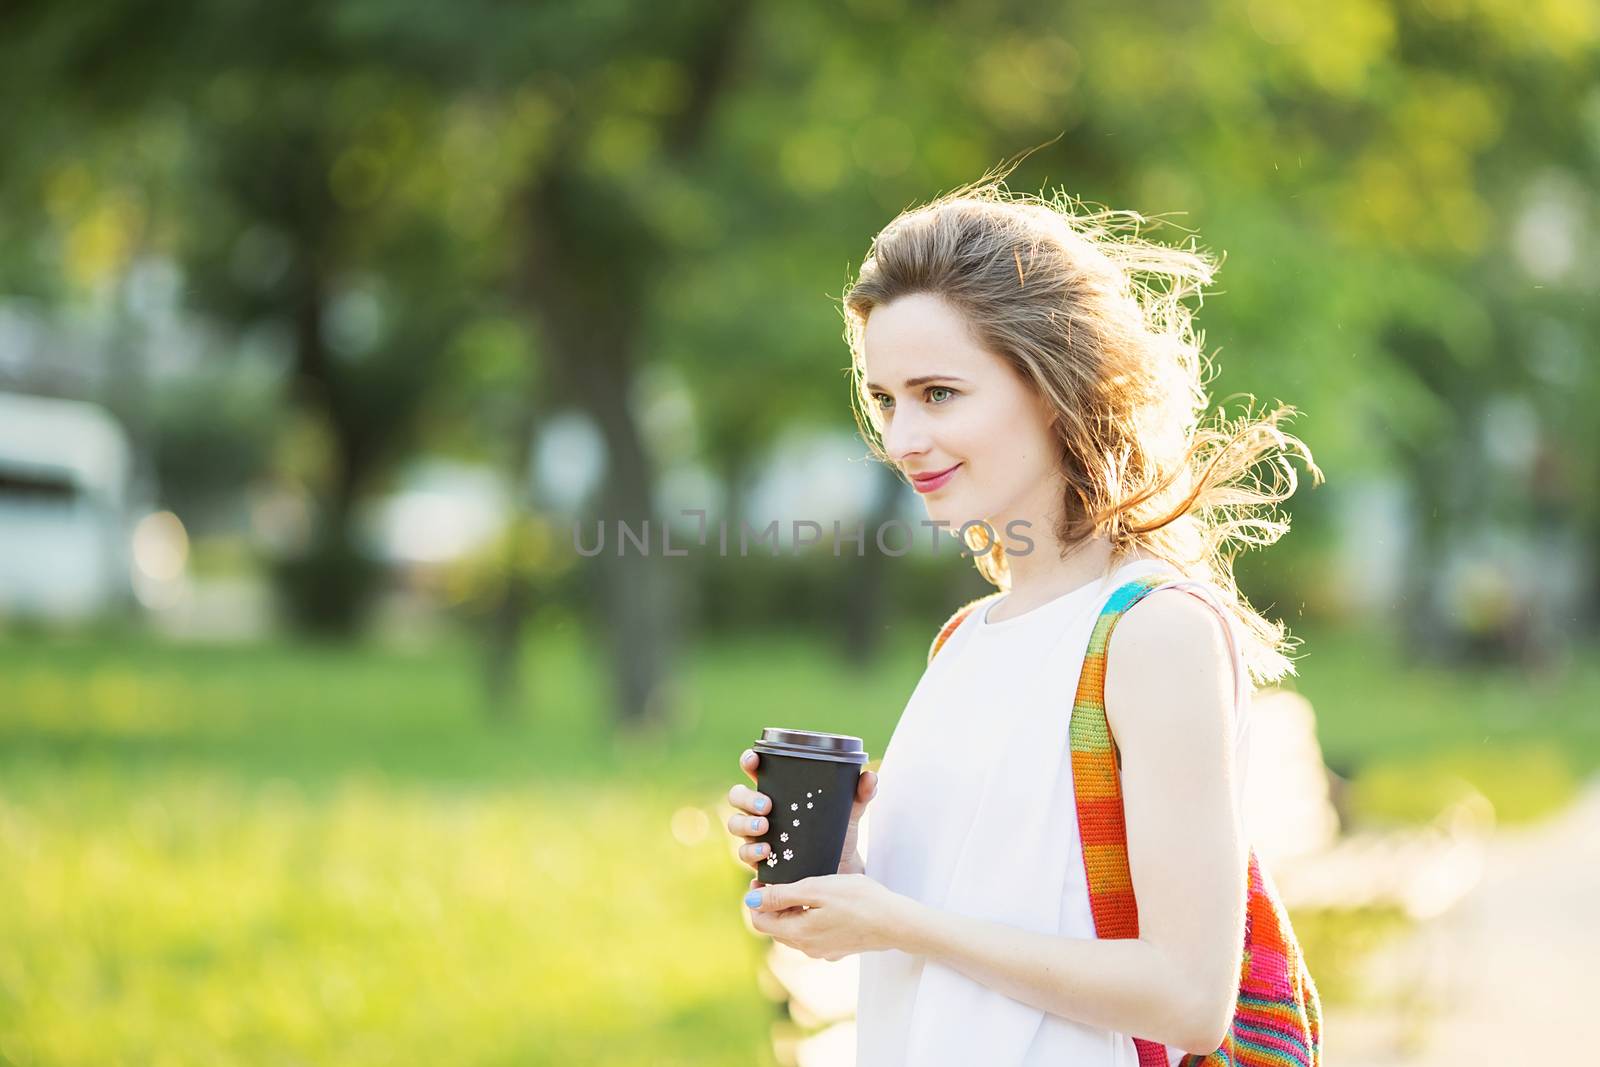 Portrait of lovely urban girl with paper cup in her hands. Happy smiling woman. Fashionable blonde girl walking in a city park